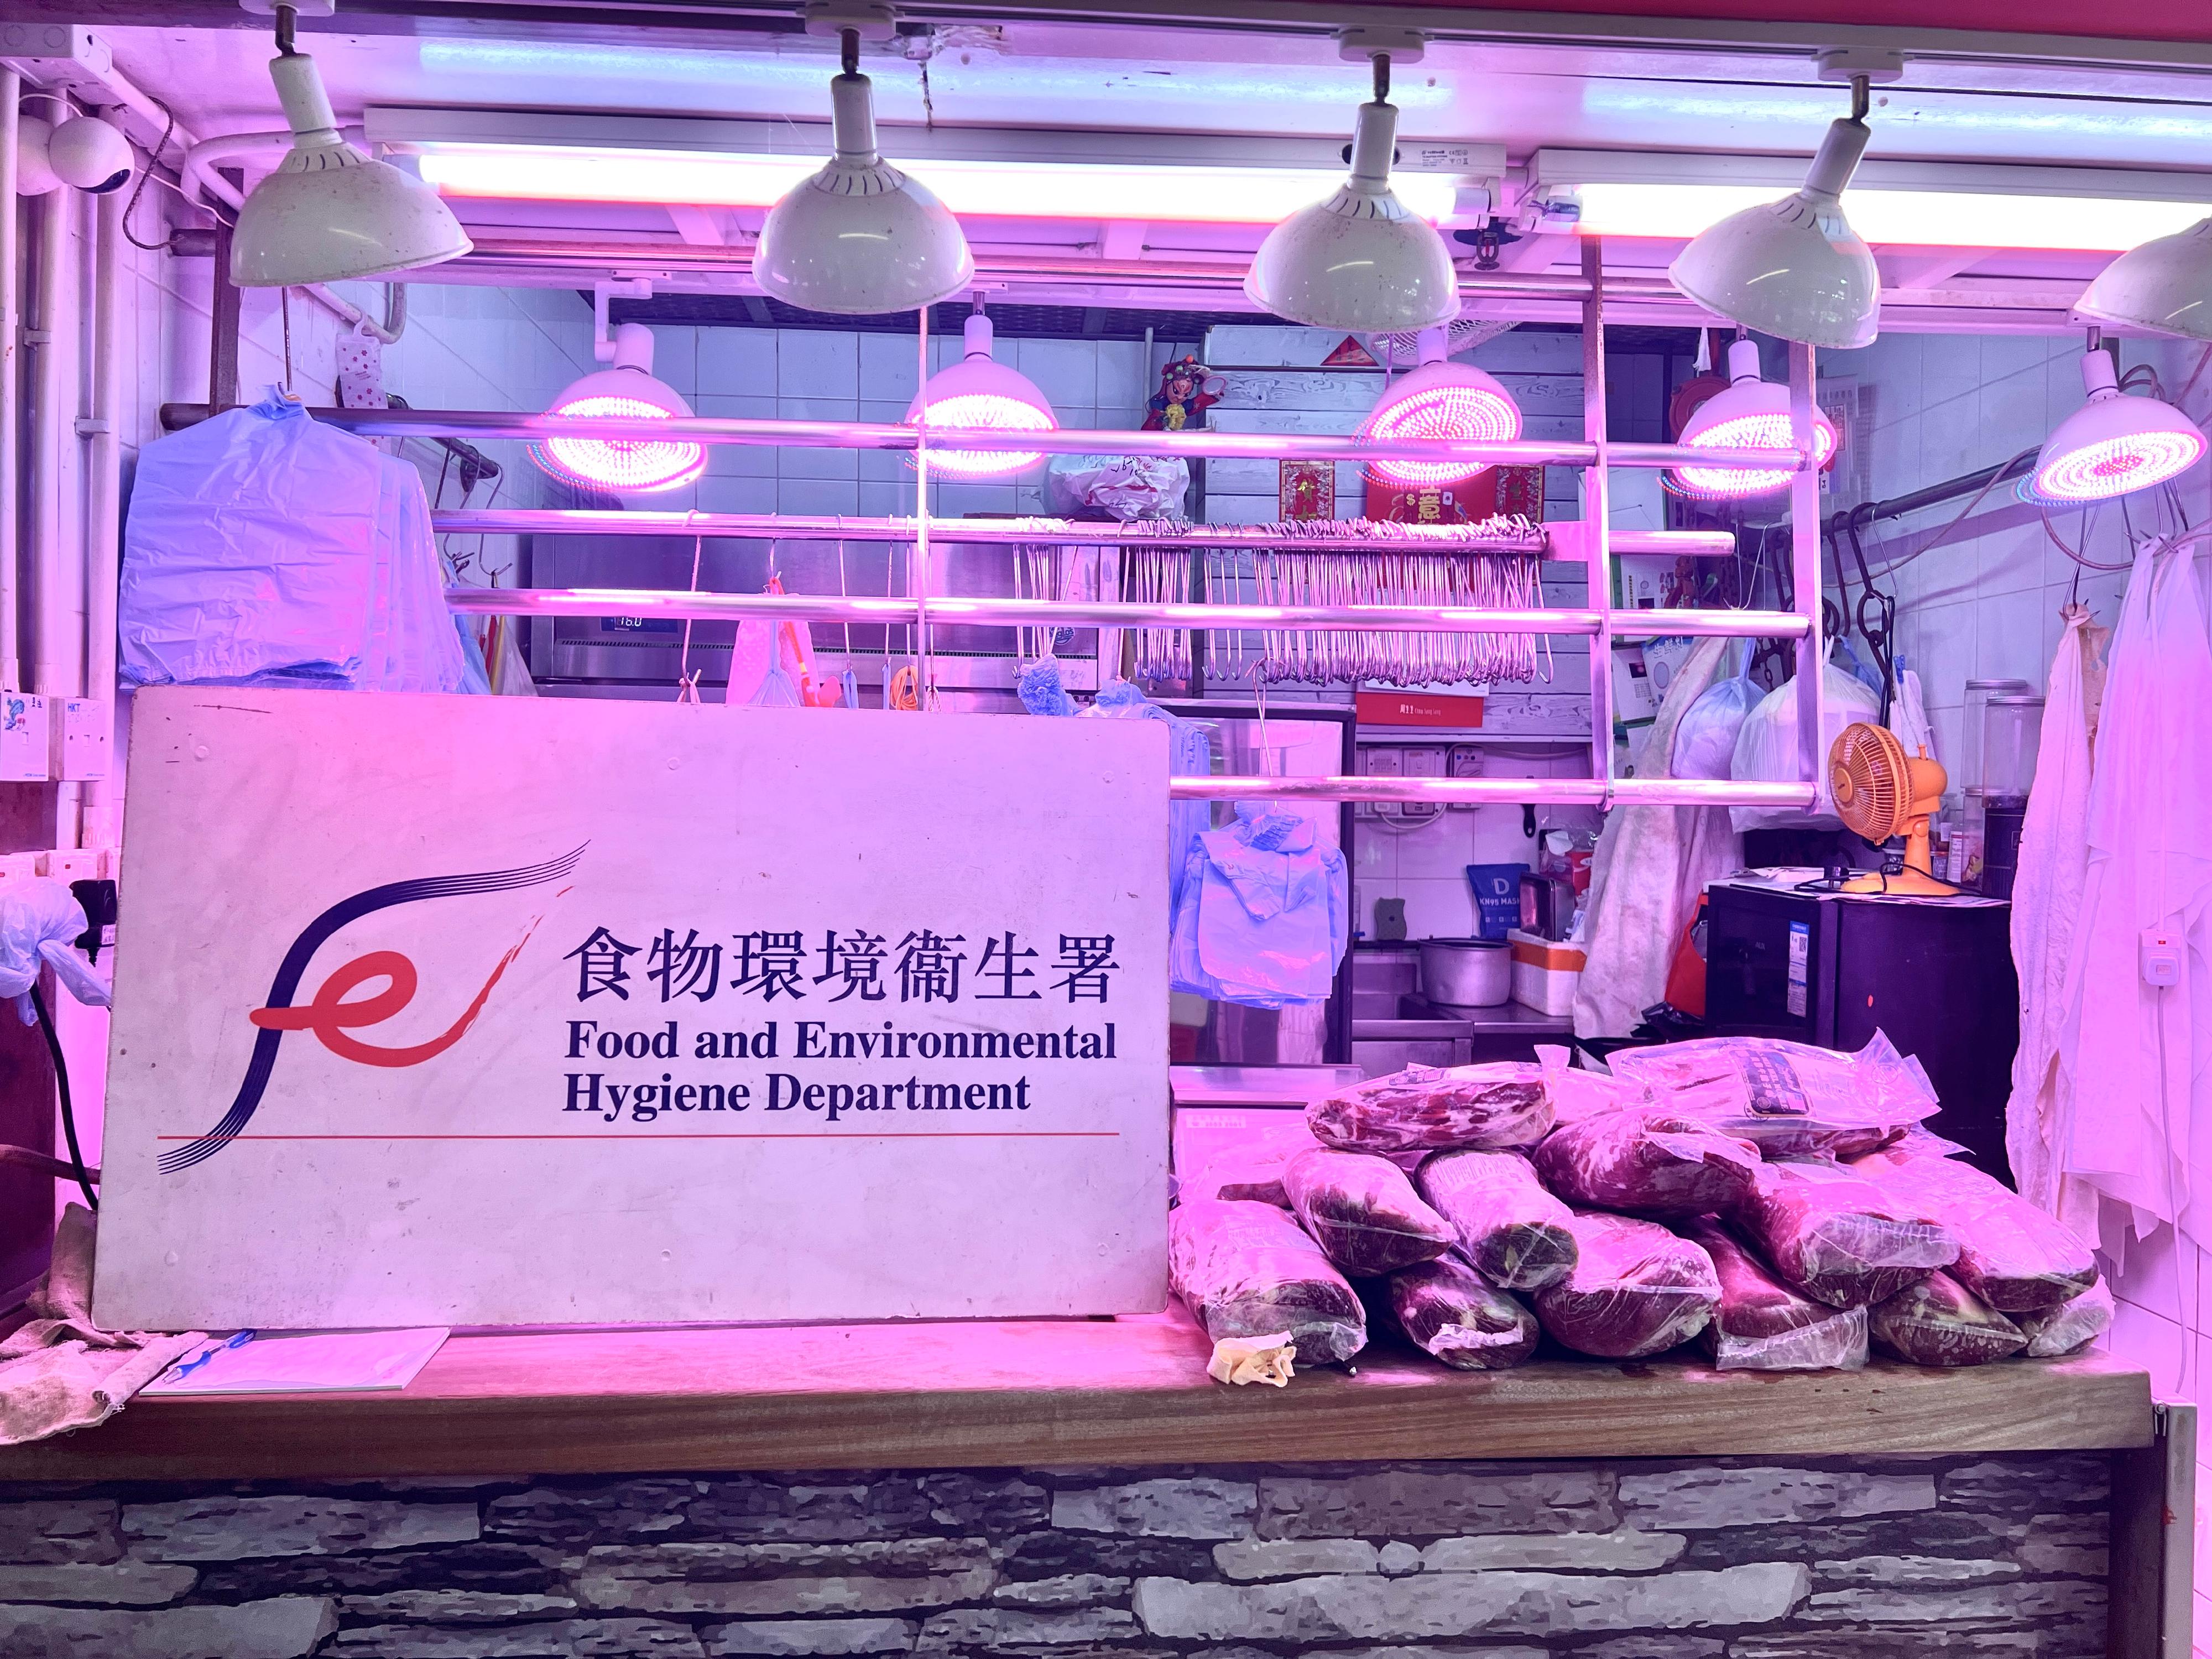 The Food and Environmental Hygiene Department (FEHD) raided two licensed fresh provision shops in Wong Tai Sin District and Tuen Mun District suspected of selling frozen meat as fresh meat today (January 26). Photo shows some of the meat seized by FEHD officers during the operation in Tuen Mun District.